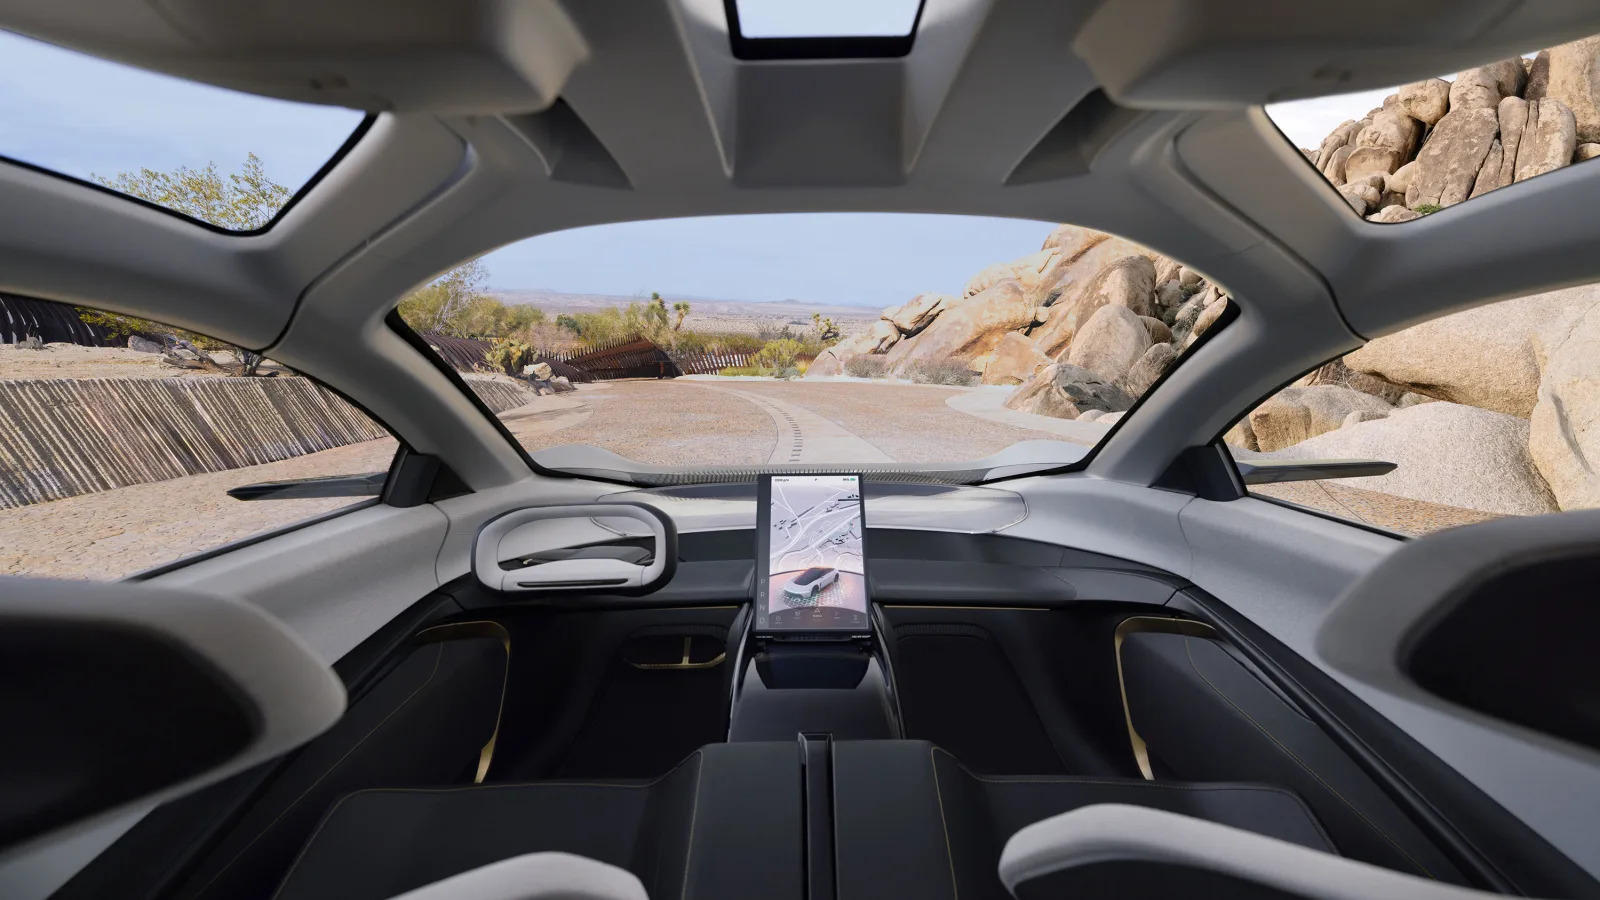 The interior of the Chrysler Halcyon Concept is an immersive env